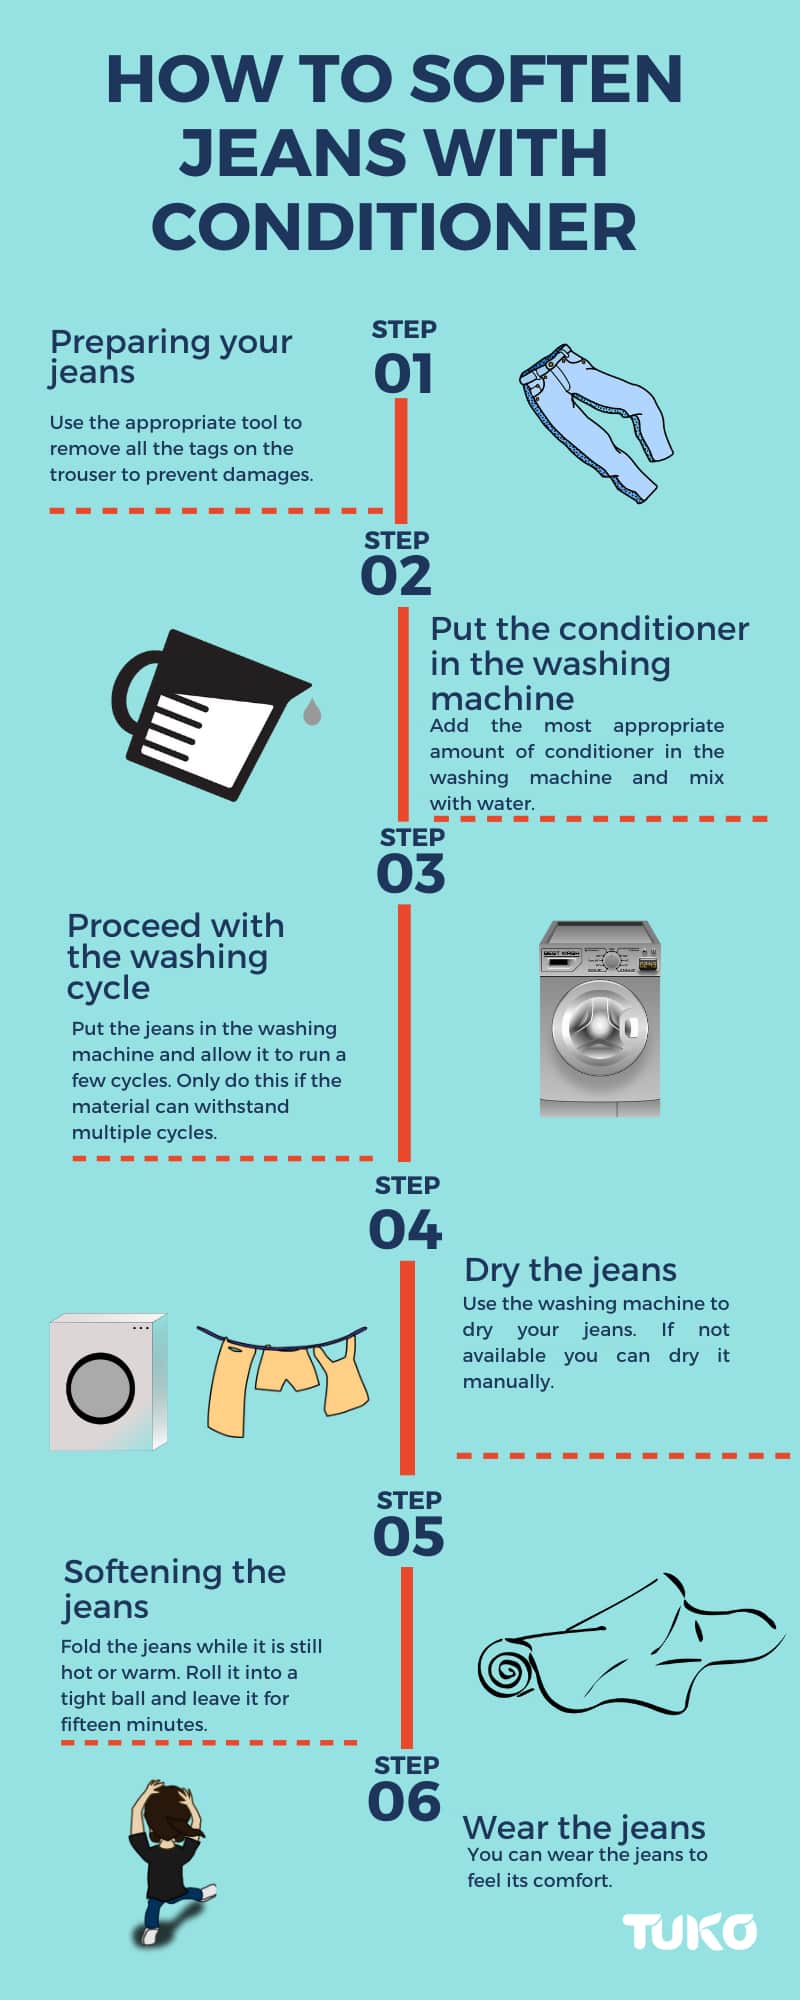 How to soften jeans with conditioner 